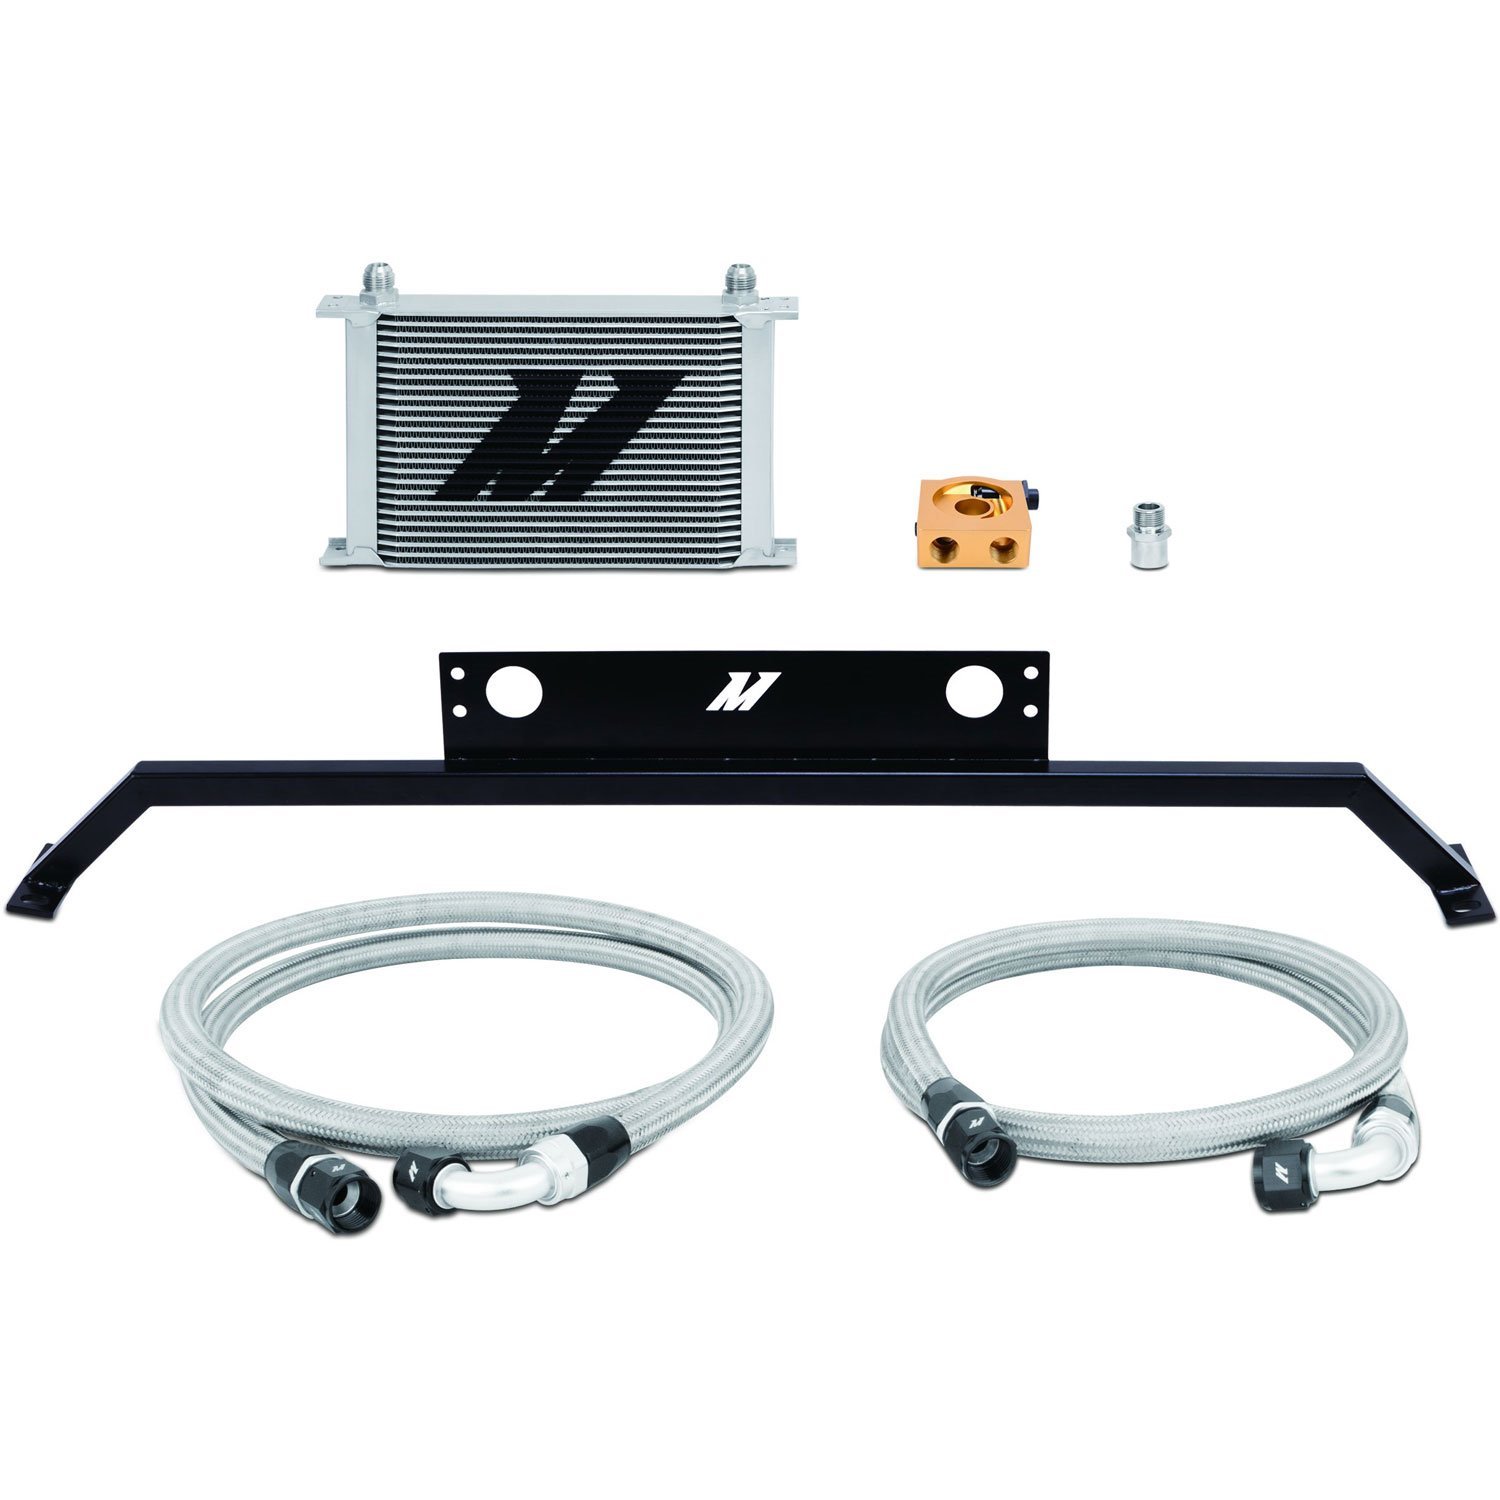 Ford Mustang 5.0L Oil Cooler Kit - MFG Part No. MMOC-MUS-11T